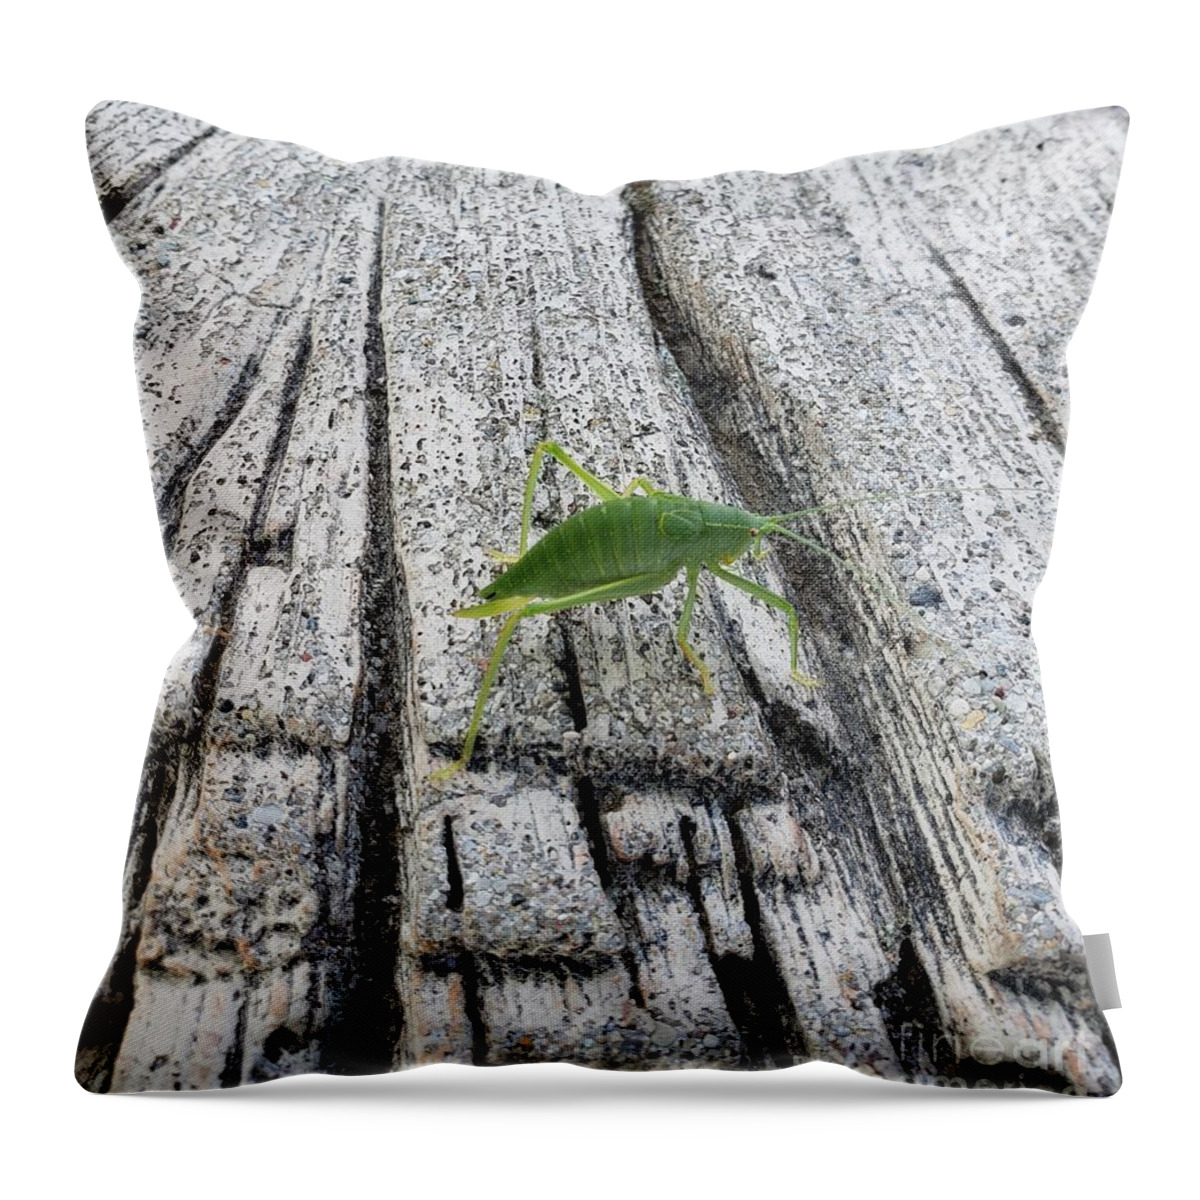 Insect Throw Pillow featuring the photograph Katydid by Anita Adams